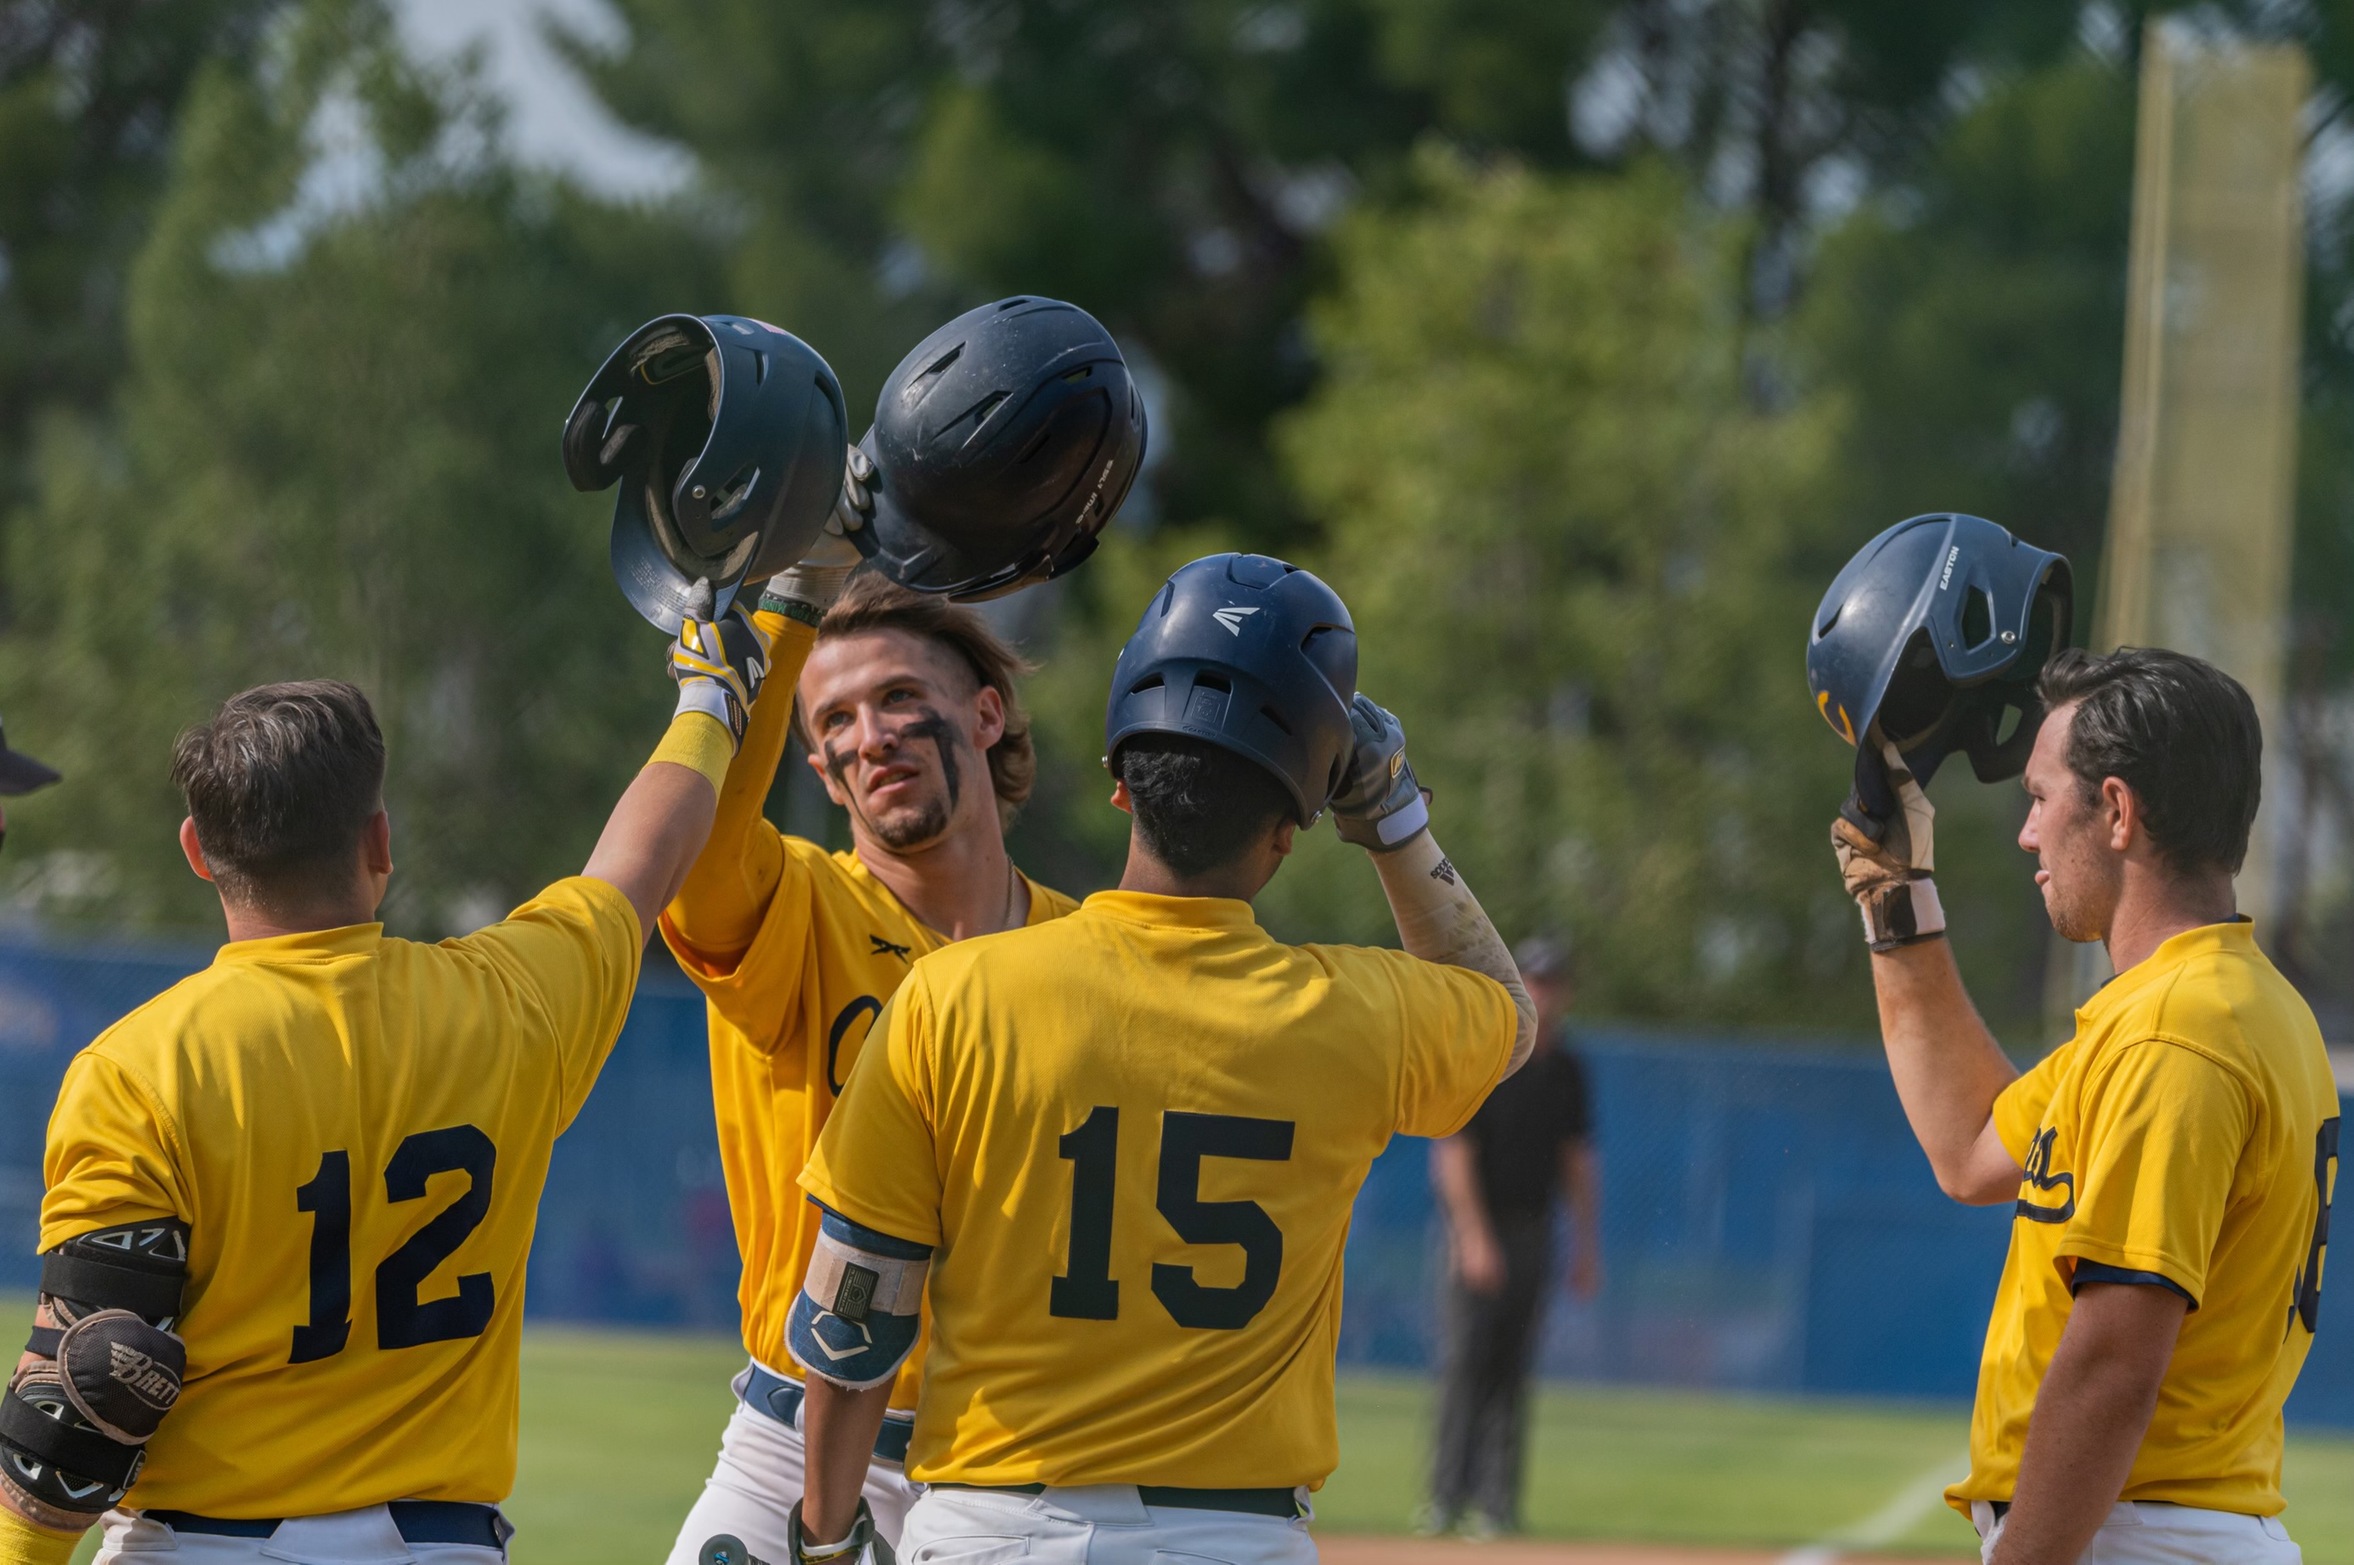 College of the Canyons baseball vs. Bakersfield College on April 26, 2022.